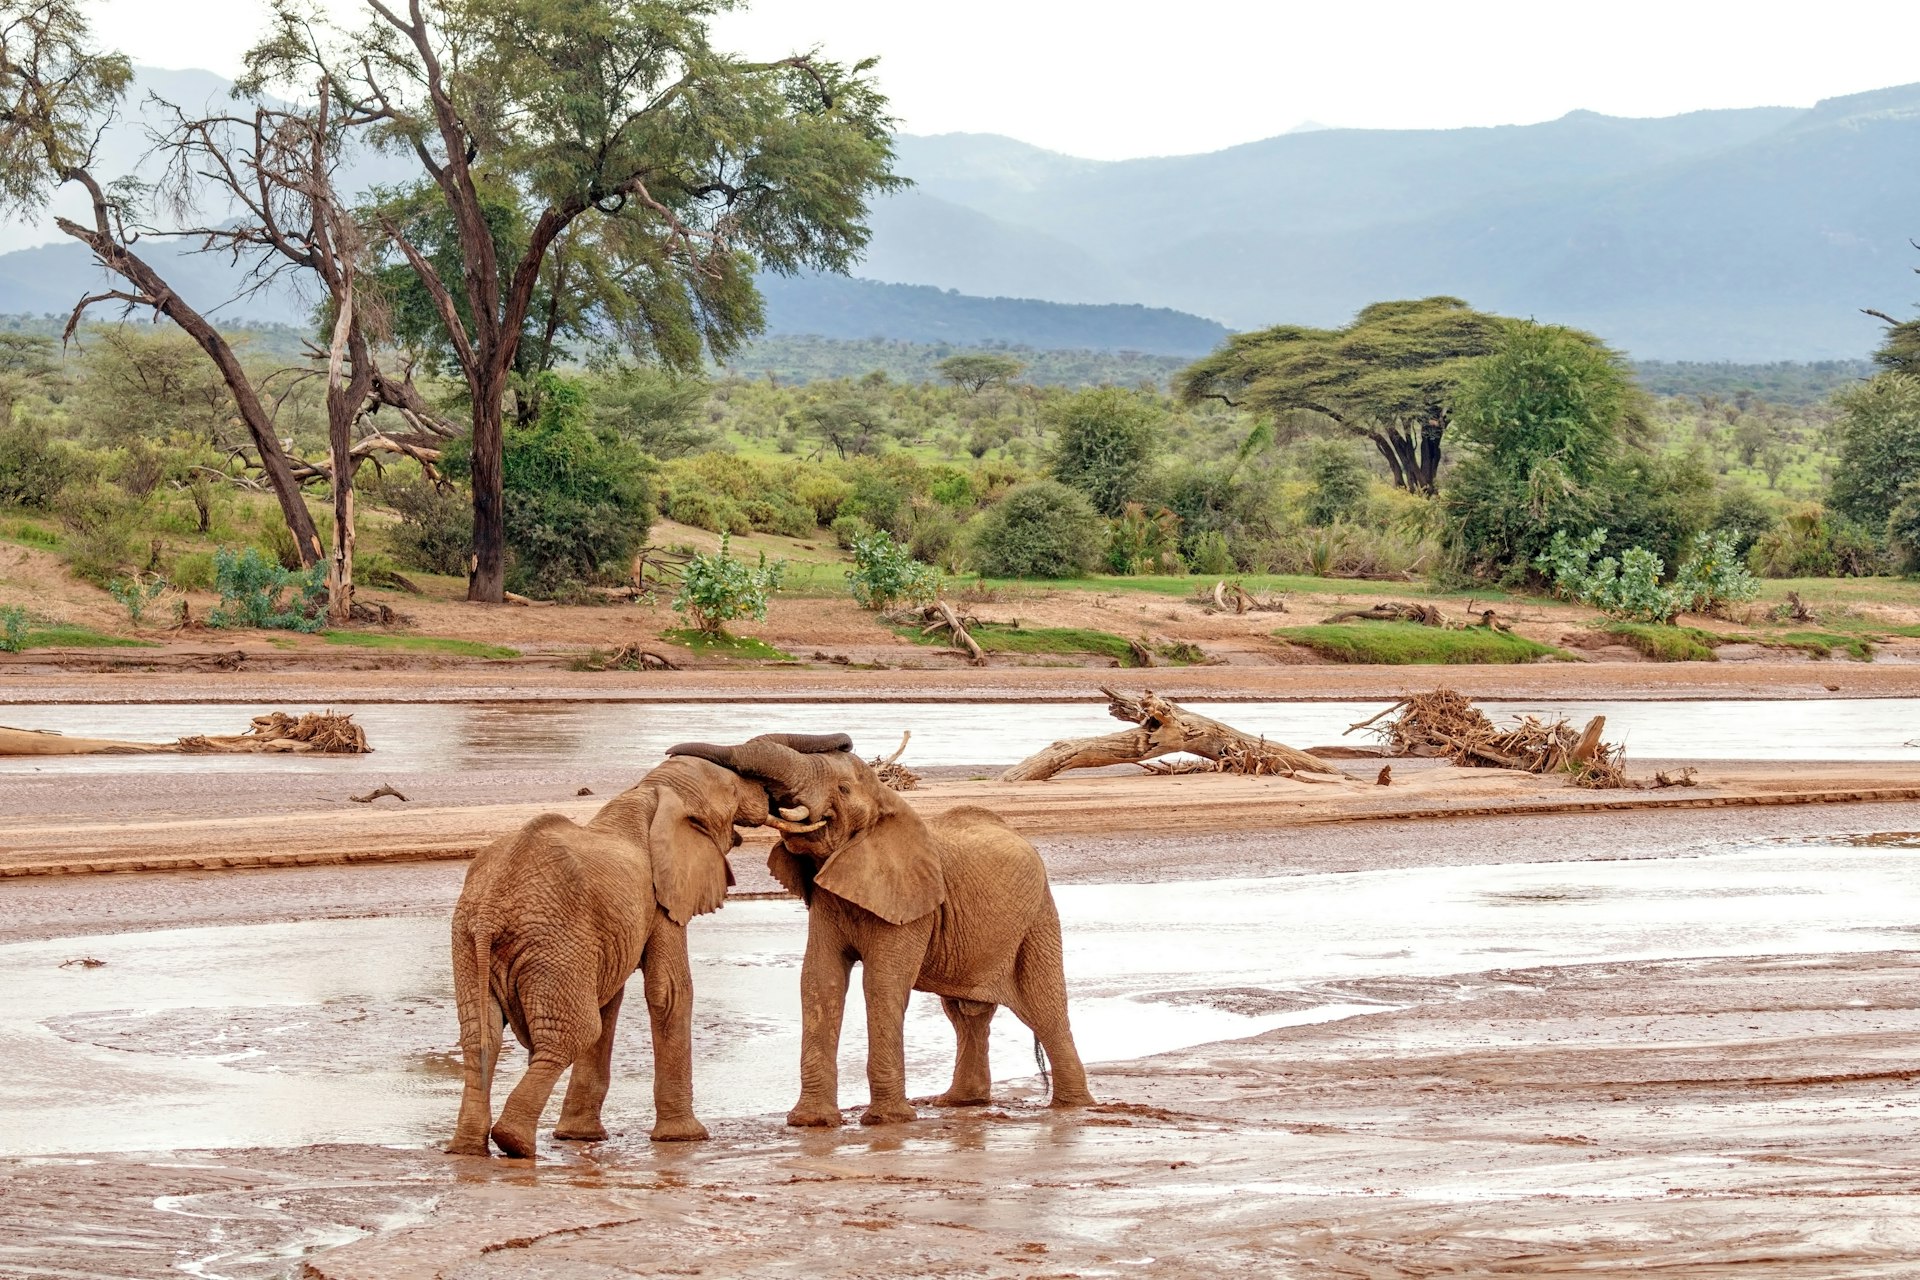 Two young elephants play fighting near a water hole in a national park